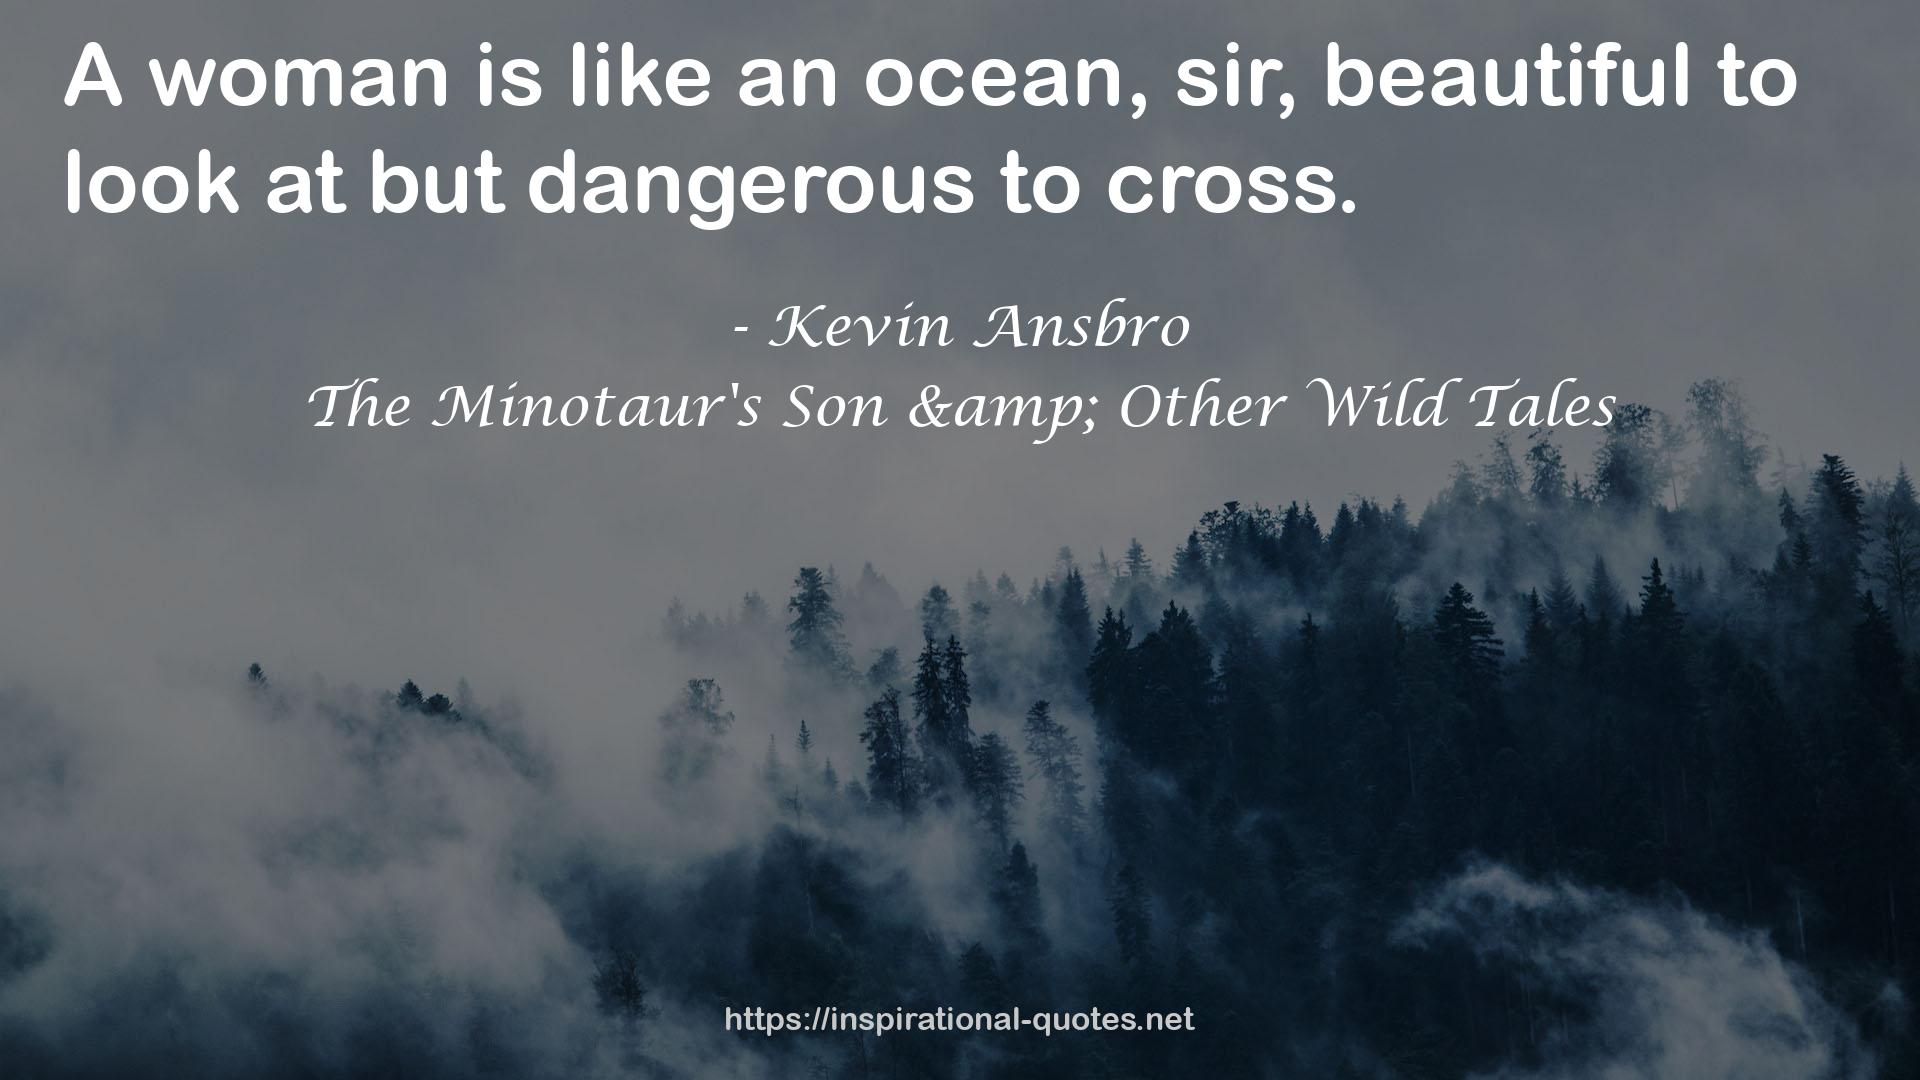 The Minotaur's Son & Other Wild Tales QUOTES